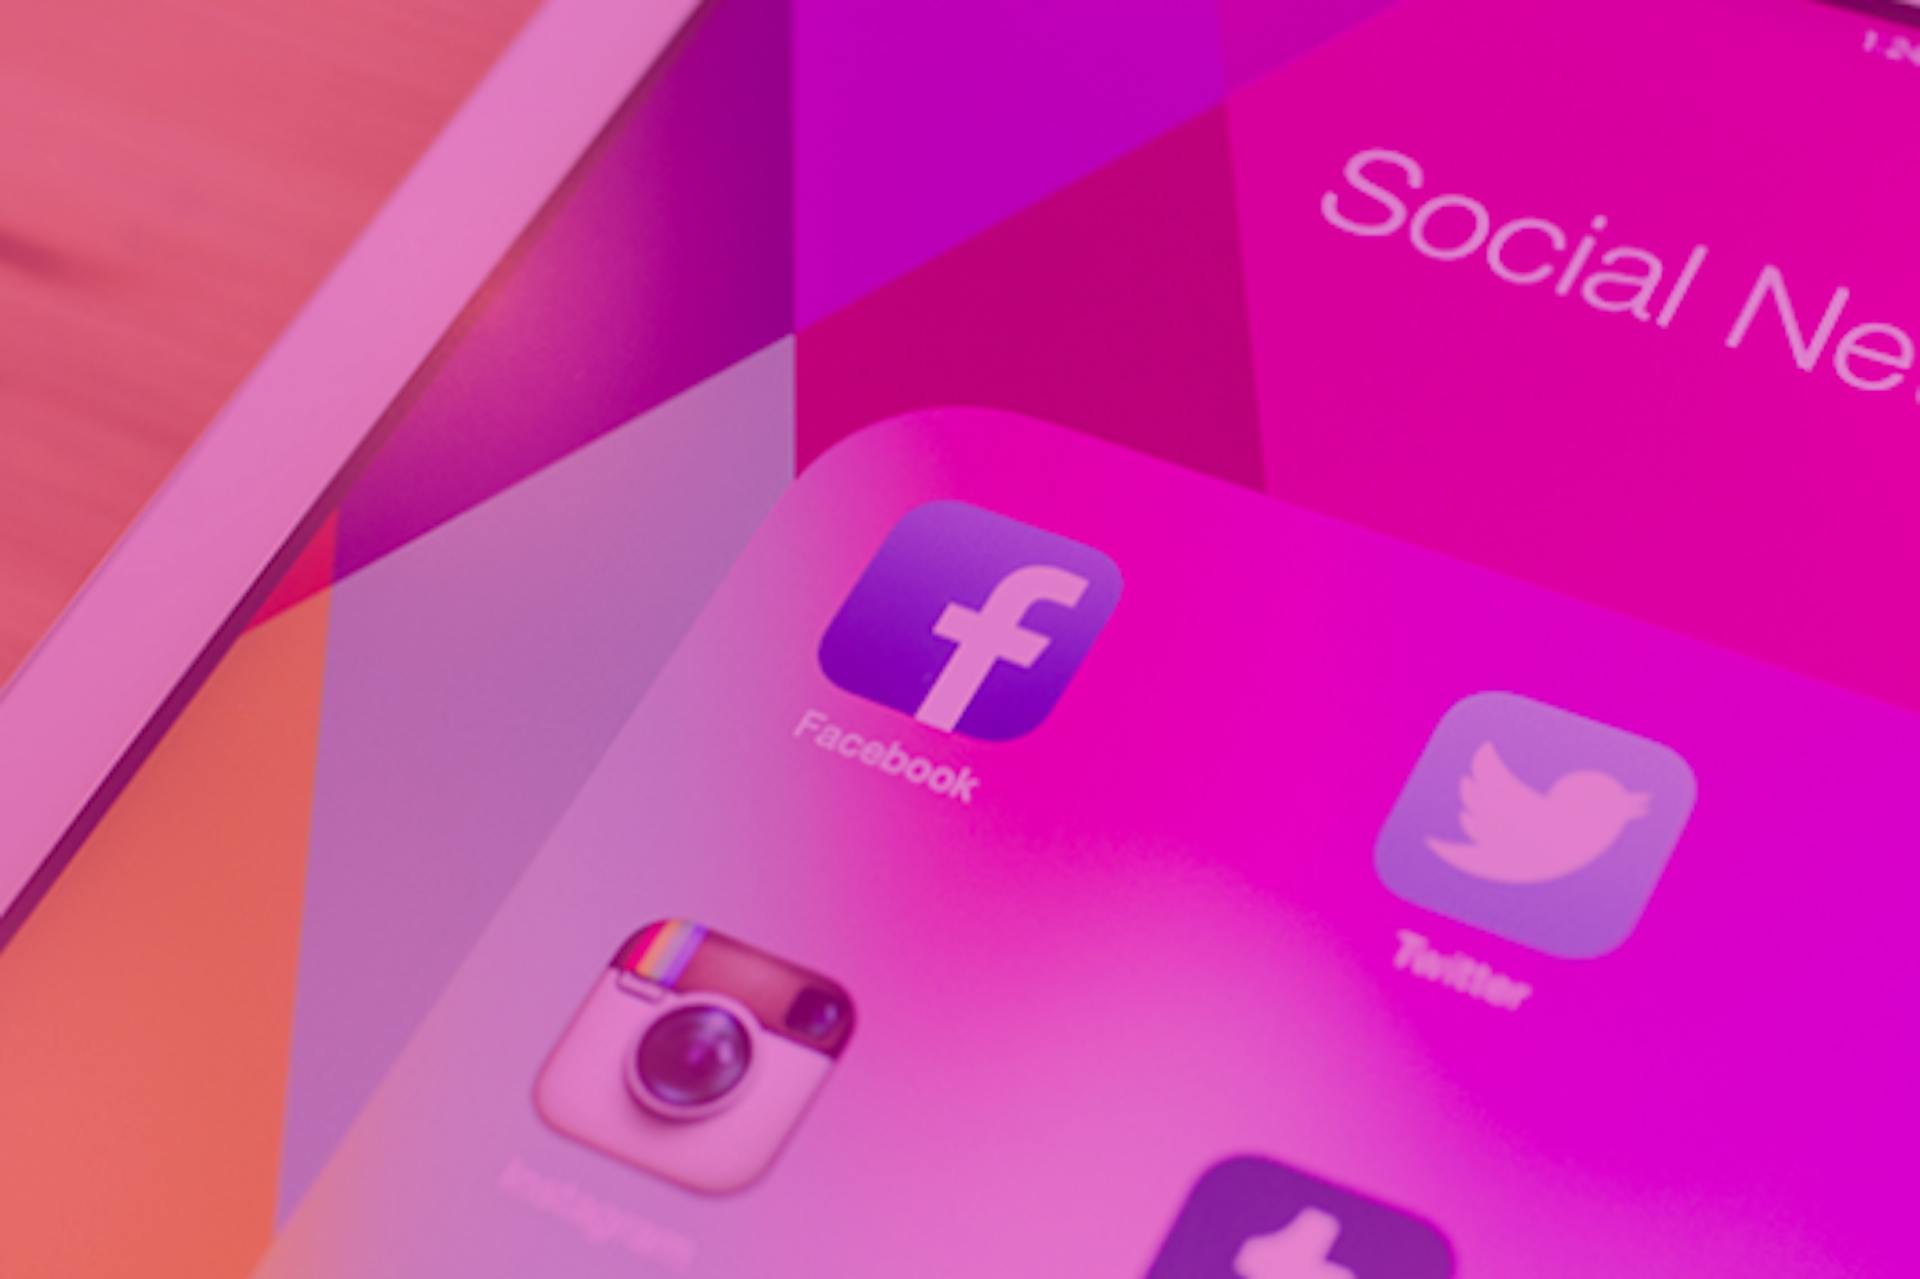 Facebook, Twitter and Instagram icons on a multicoloured background.